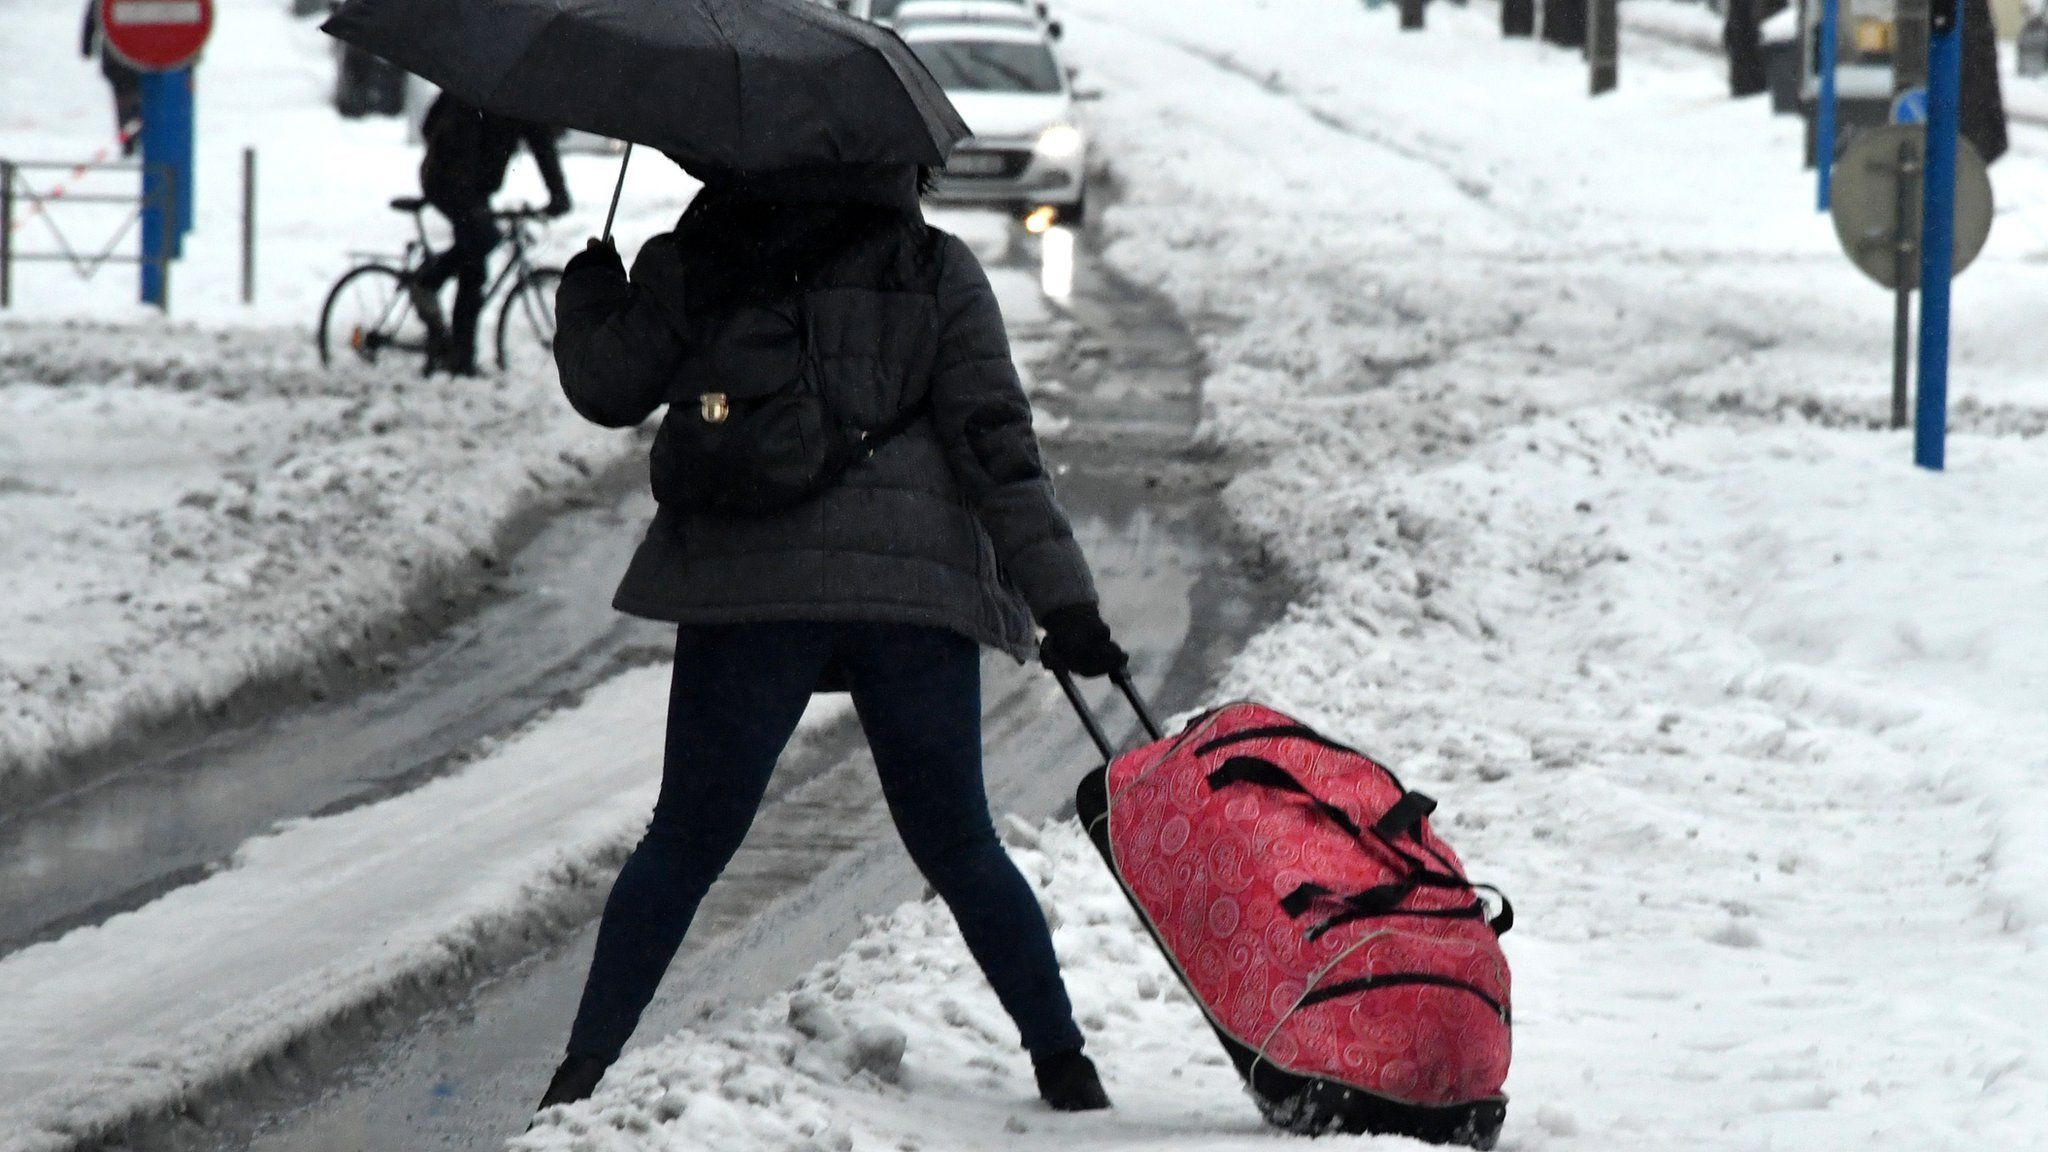 A woman struggles with a bag as she walks down a snow-covered street in Montpellier, southern France